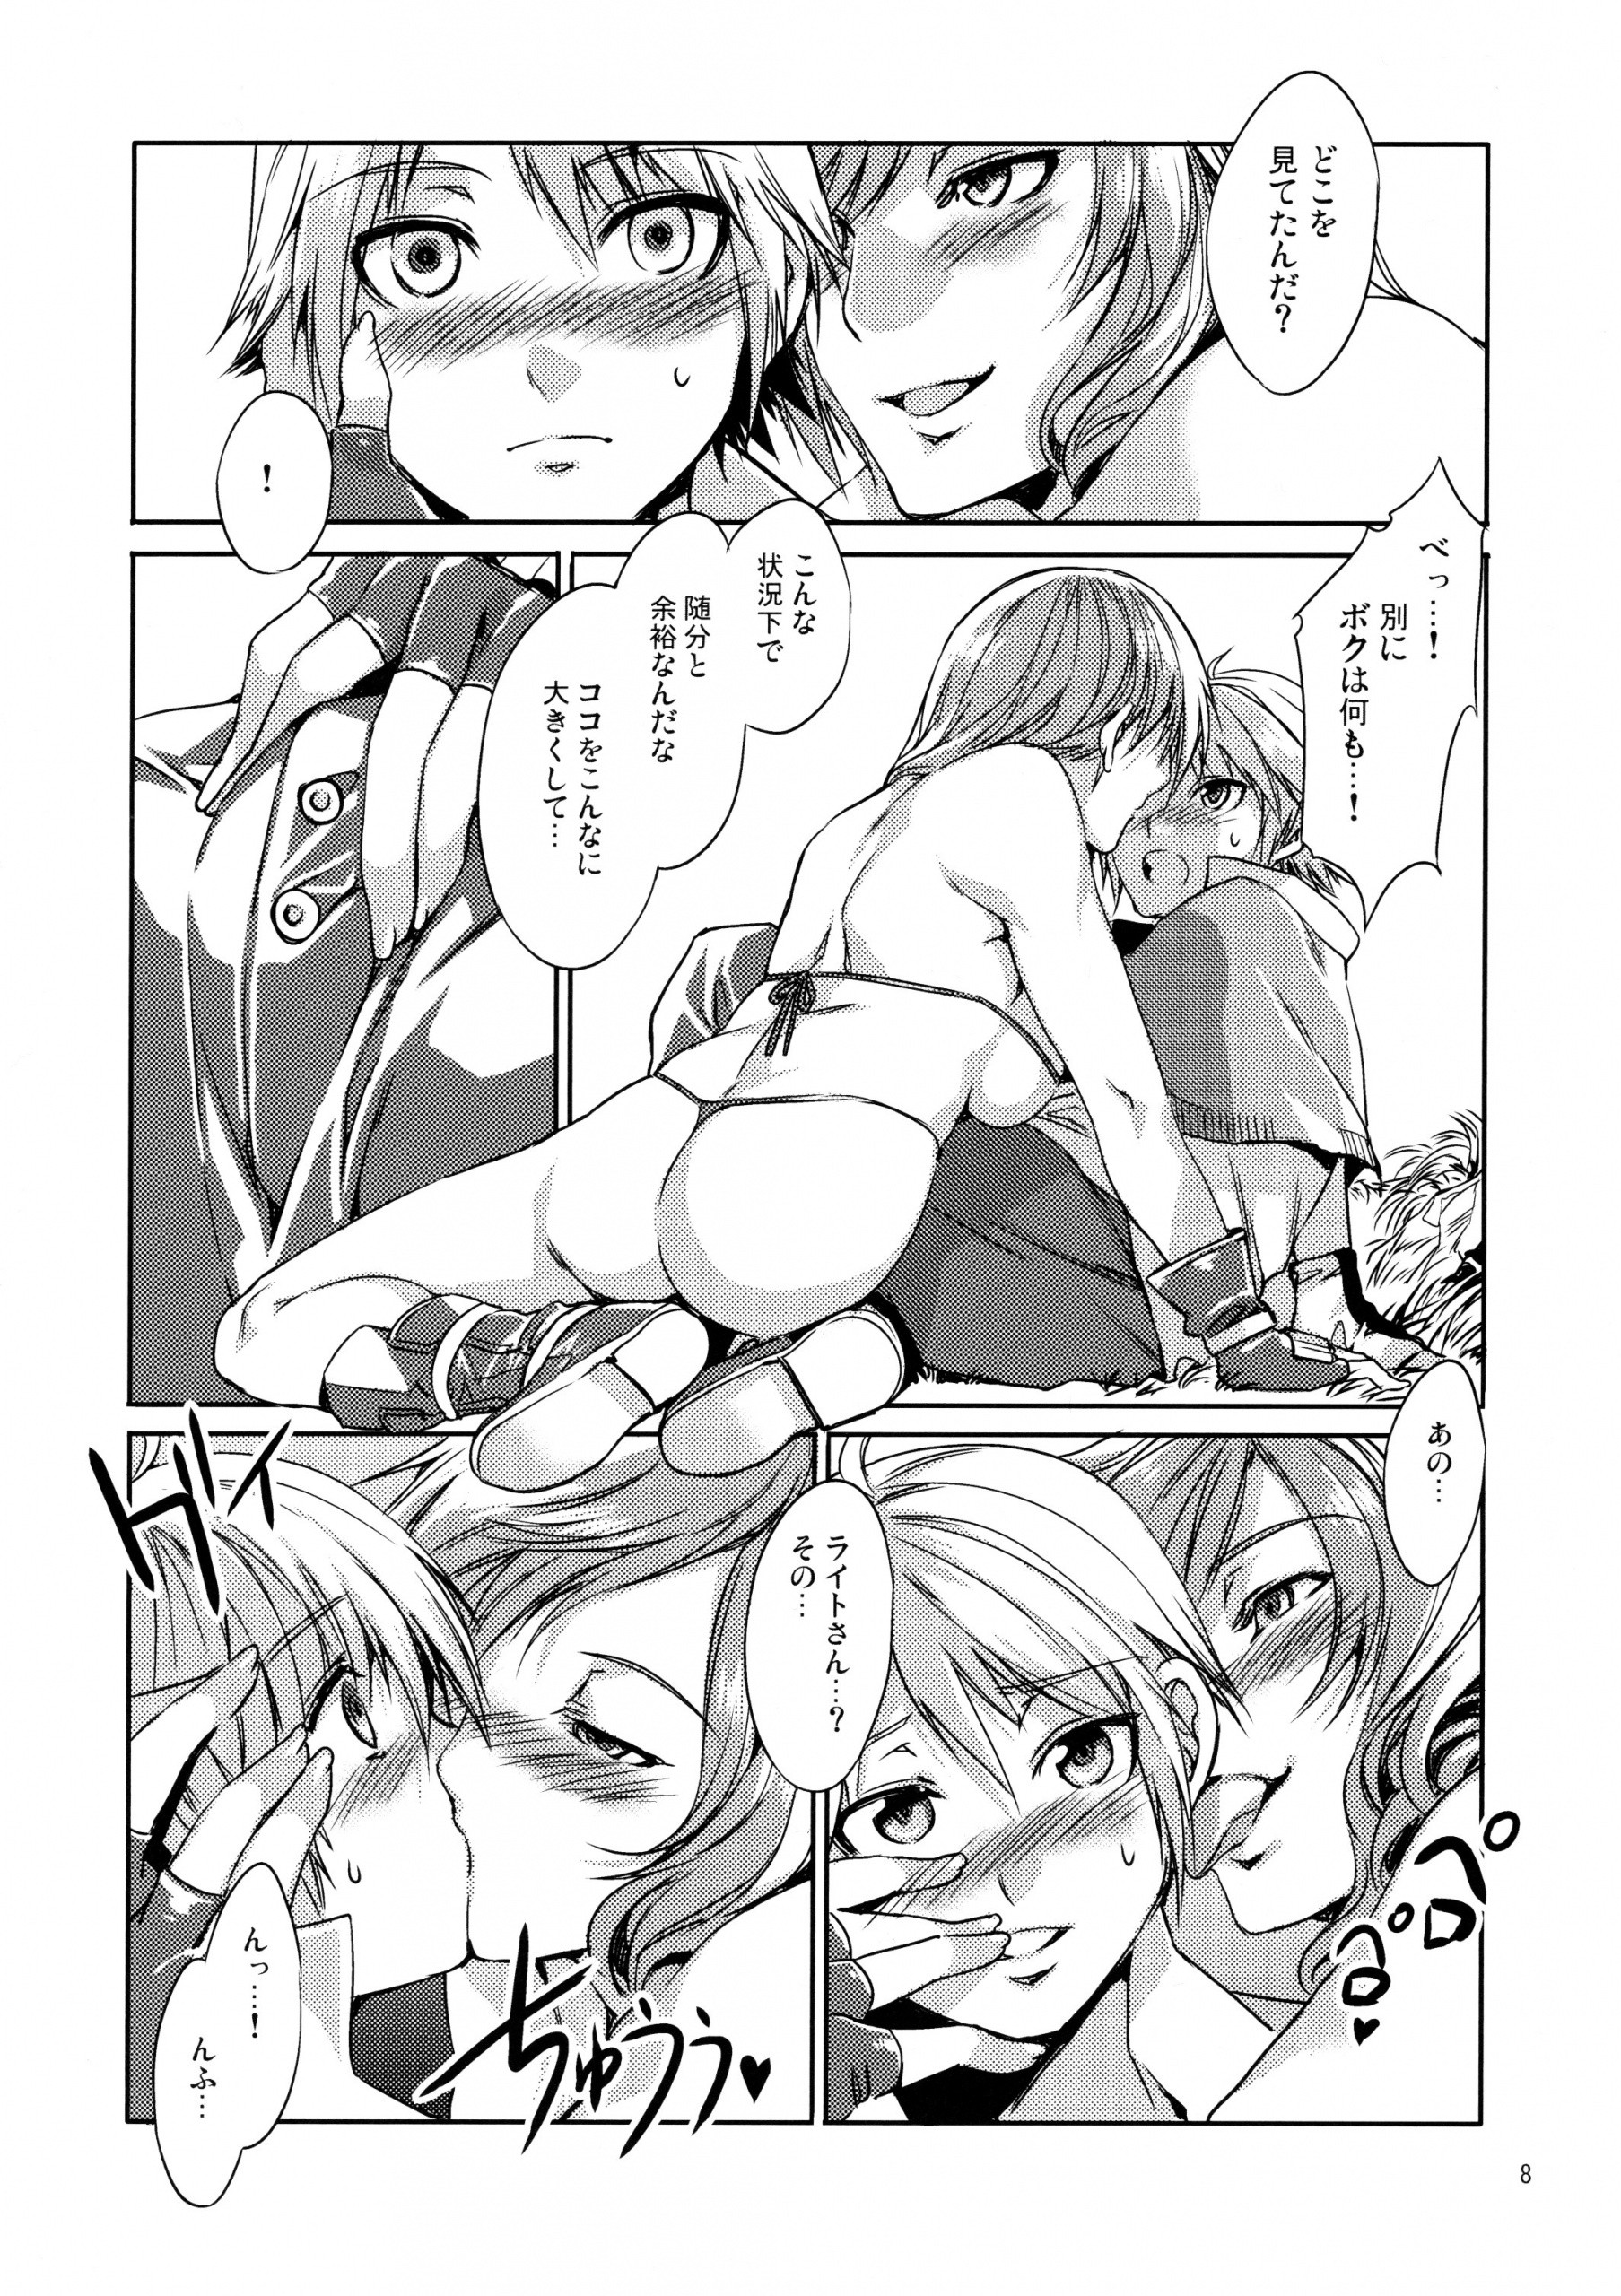 The Doujin Also Known As The Speed Of Light porn comic picture 5